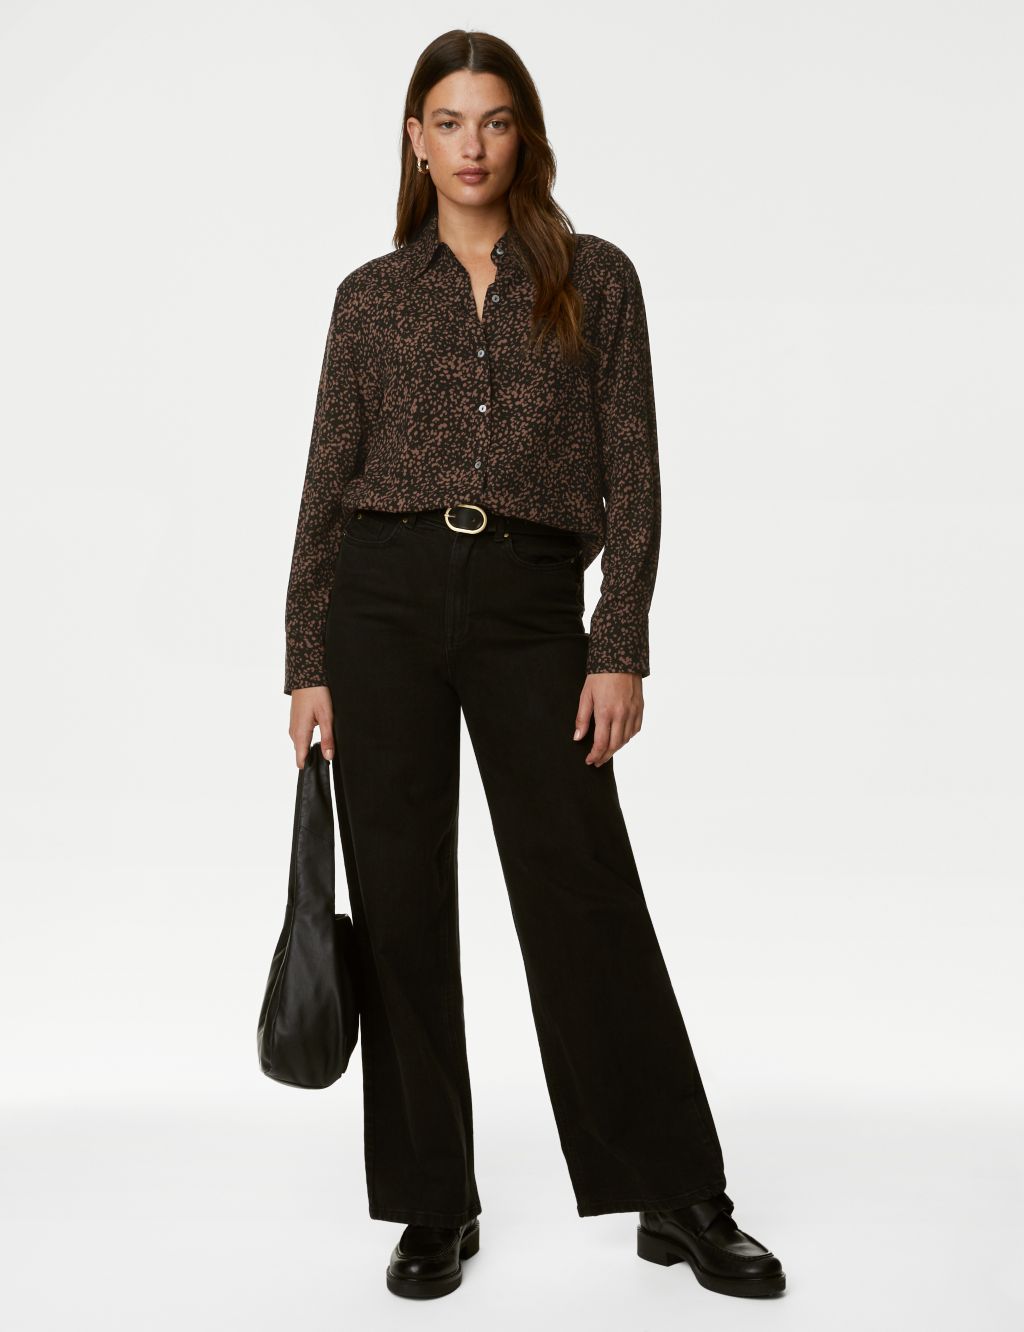 Printed Collared Relaxed Shirt image 3